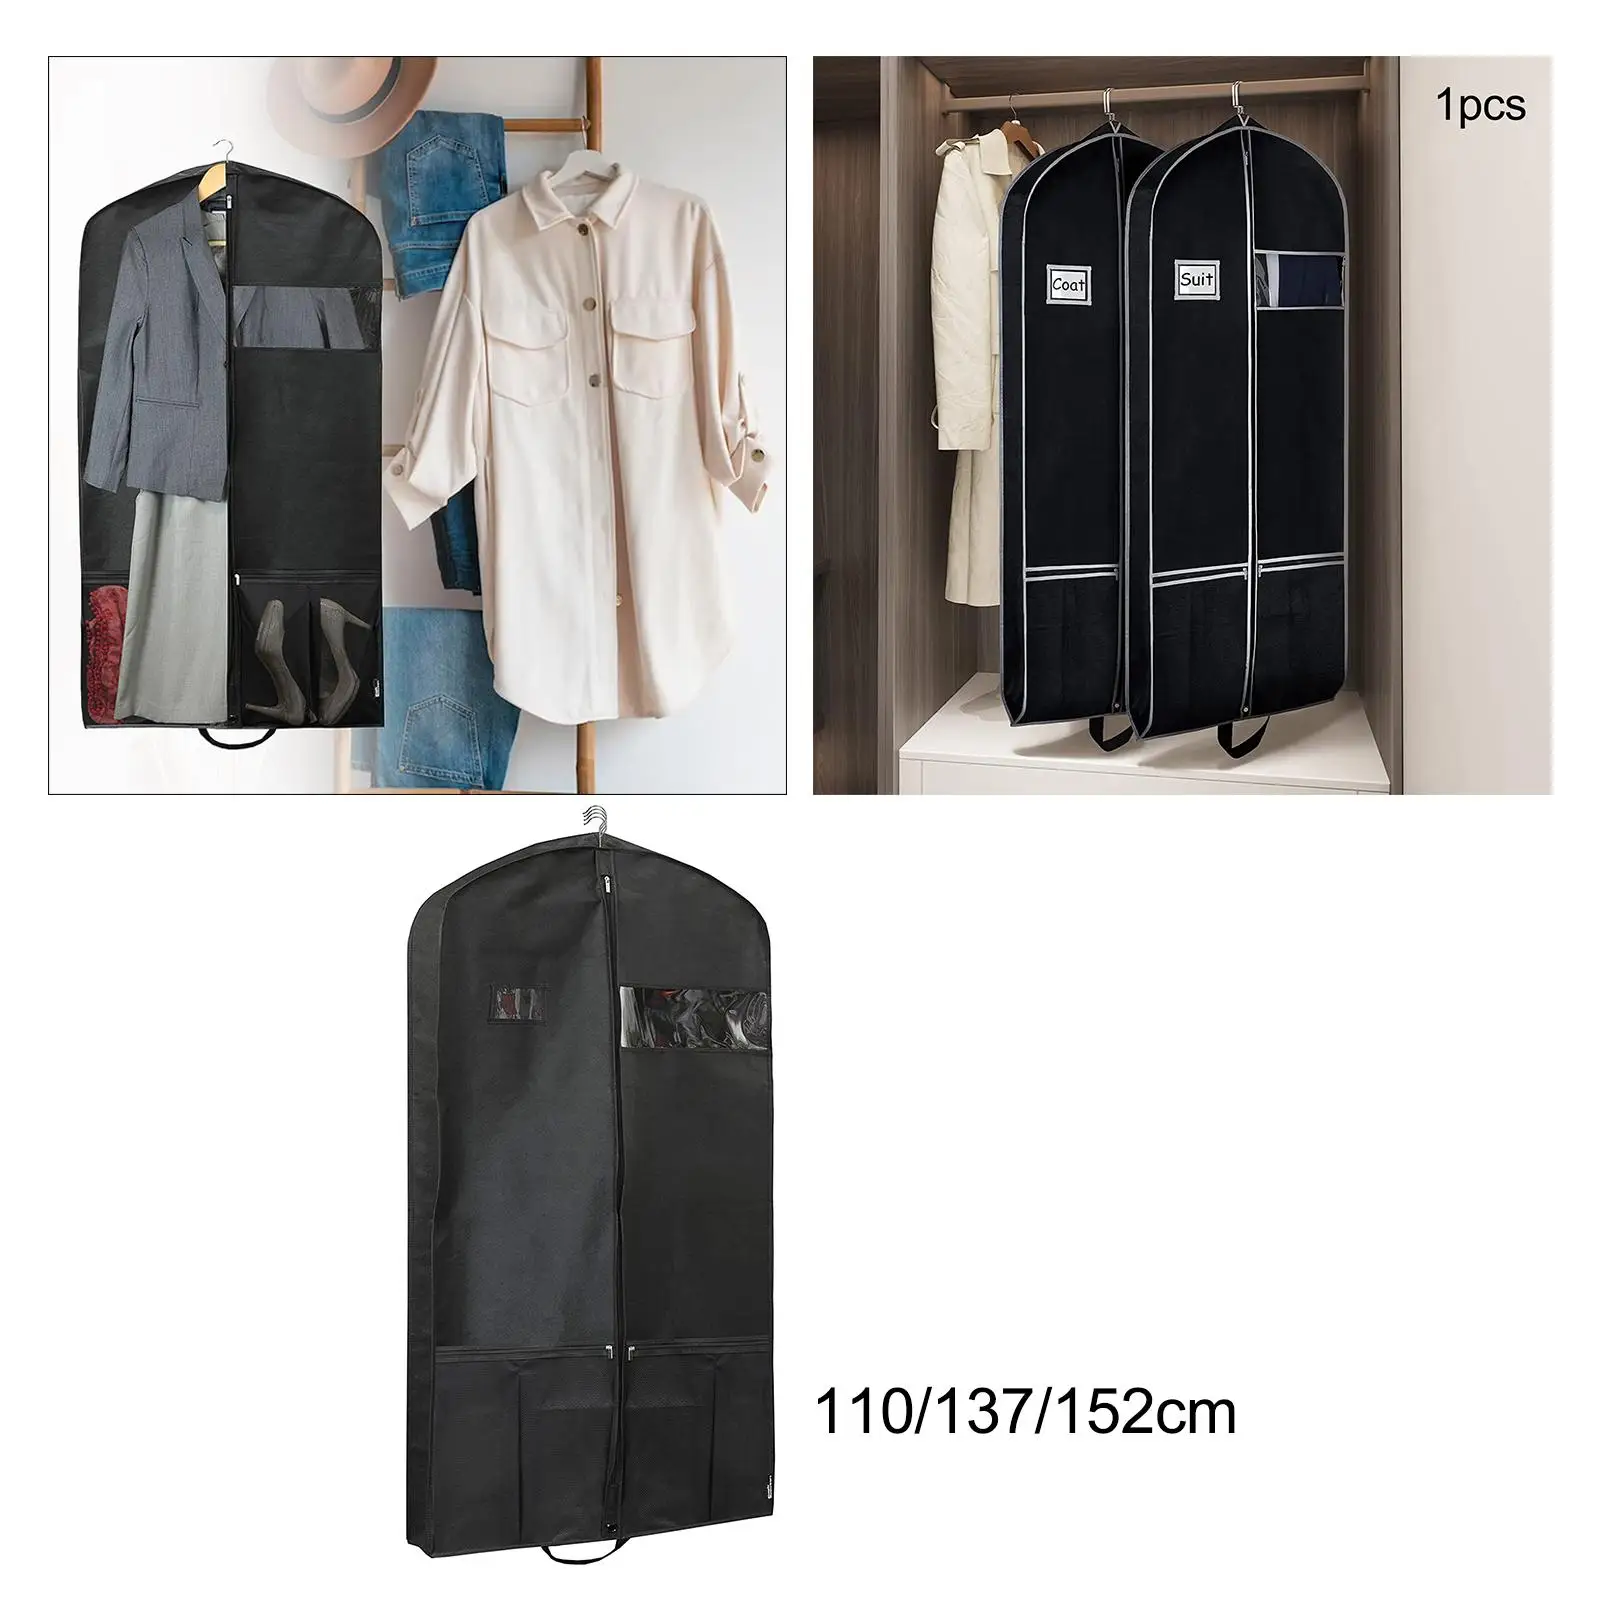 Garment Bag Water Resistance 2 Extra Pocket ,Protect Cloths from Dust and over Wrinkling Suit Bag Garment Cover Protector